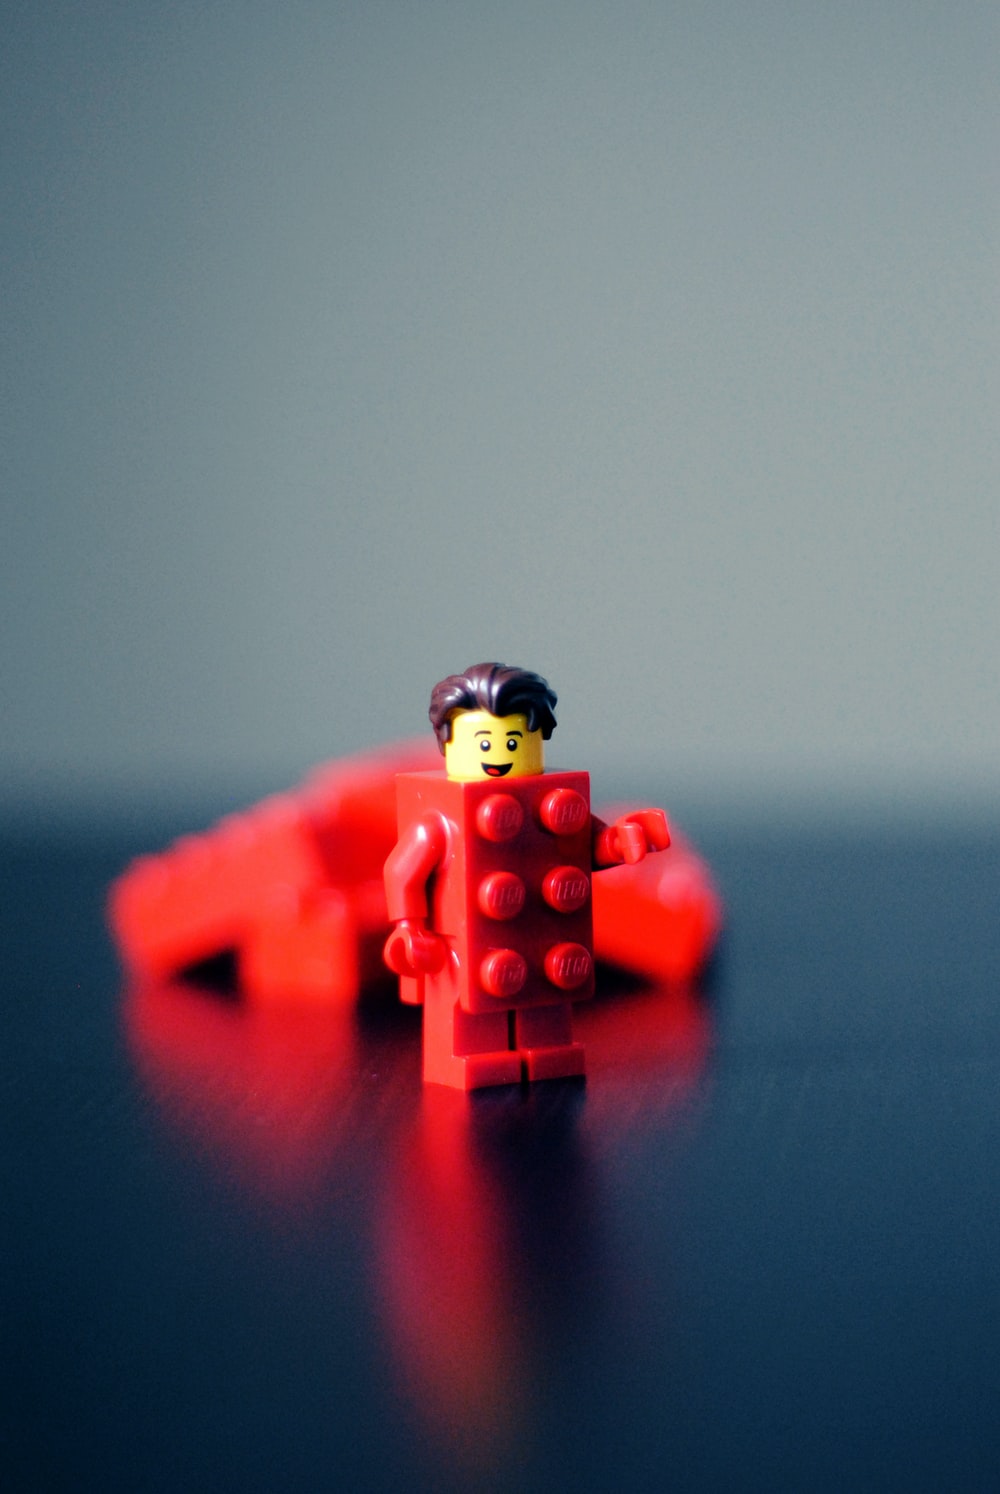 Lego Minifigure Picture. Download Free Image